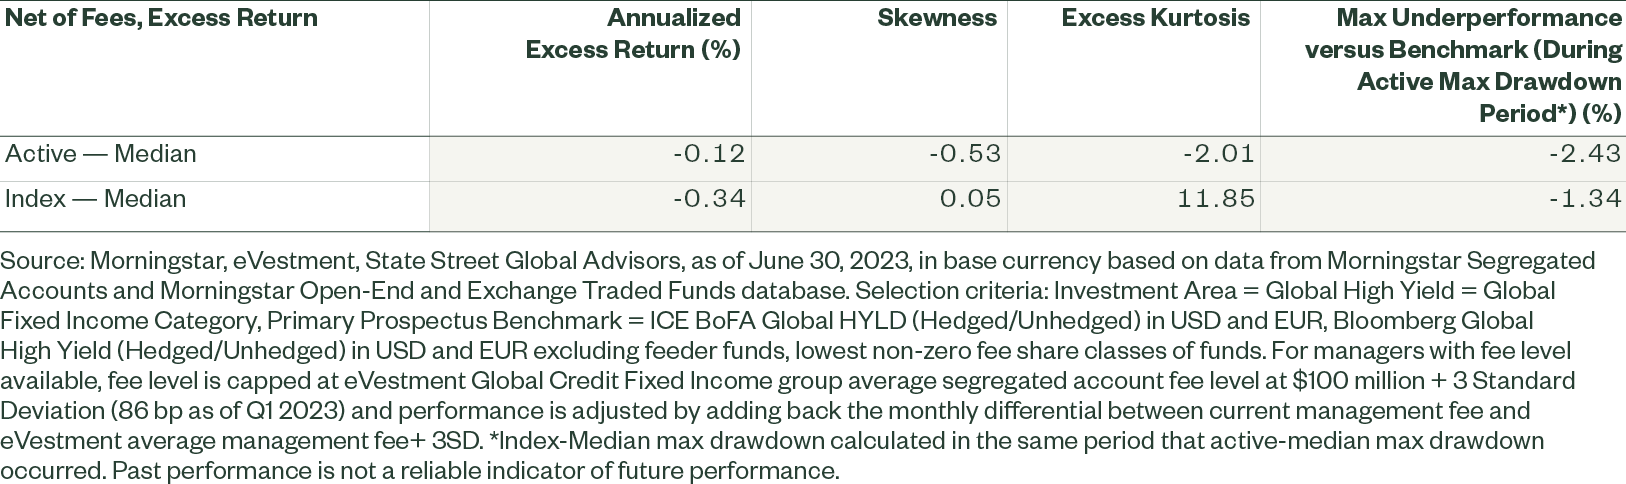 Active and index fixed income